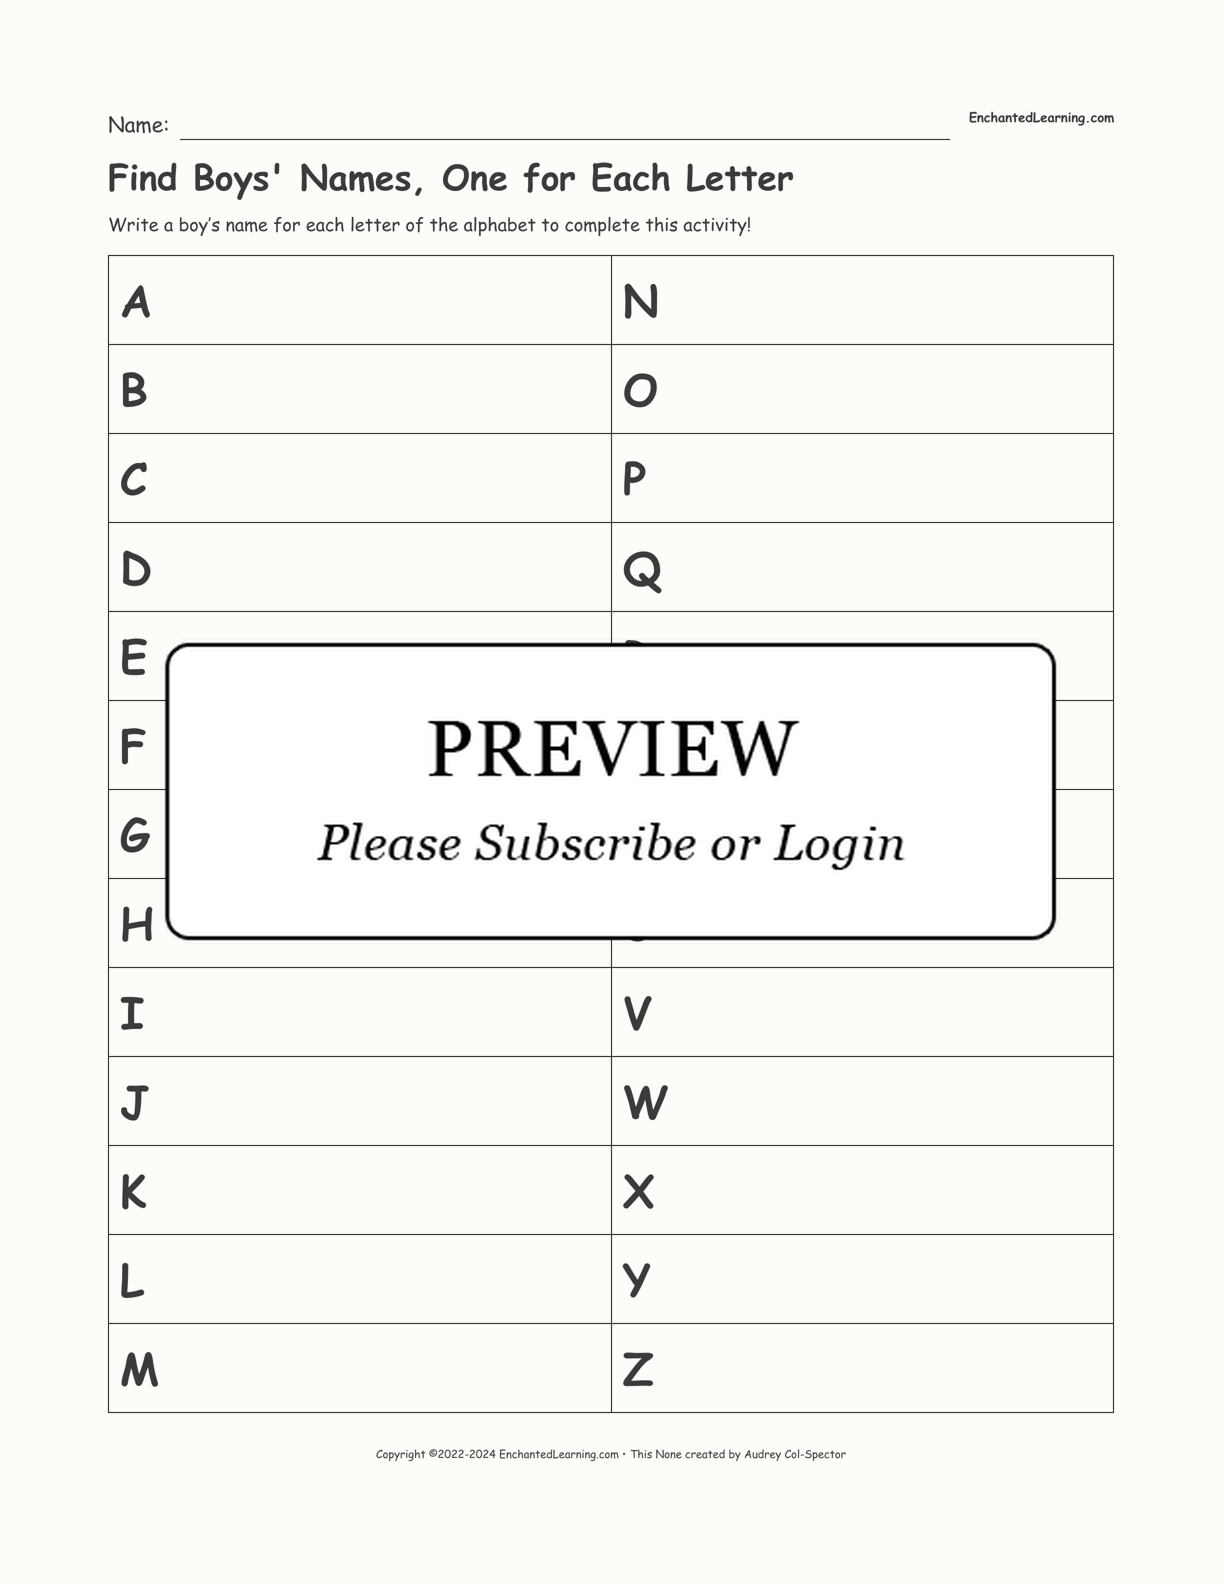 Find Boys' Names, One for Each Letter interactive worksheet page 1